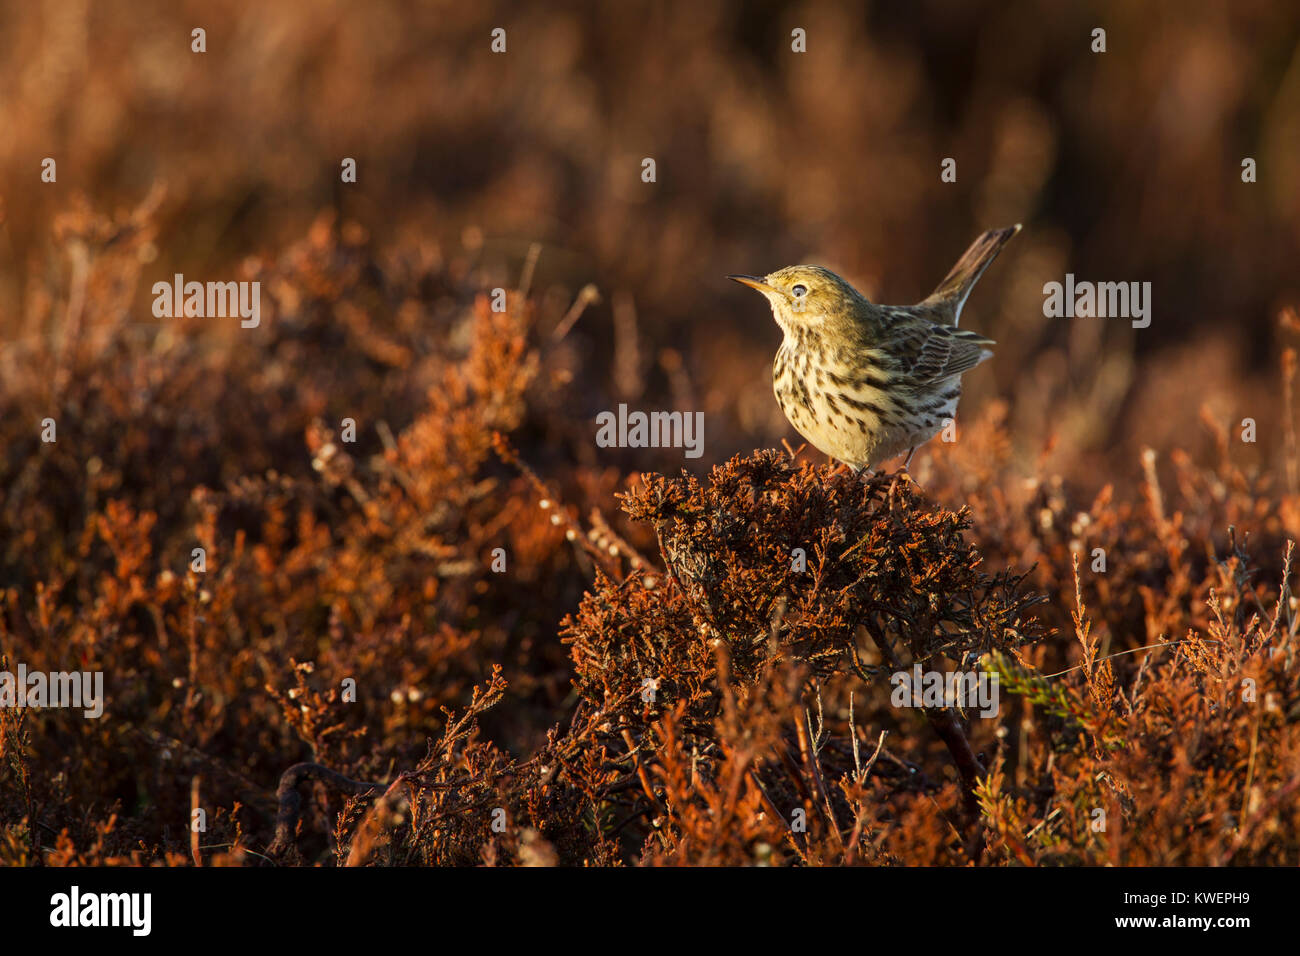 Meadow pipit, Latin name Anthus pratensis, perched on heather in warm early morning light Stock Photo